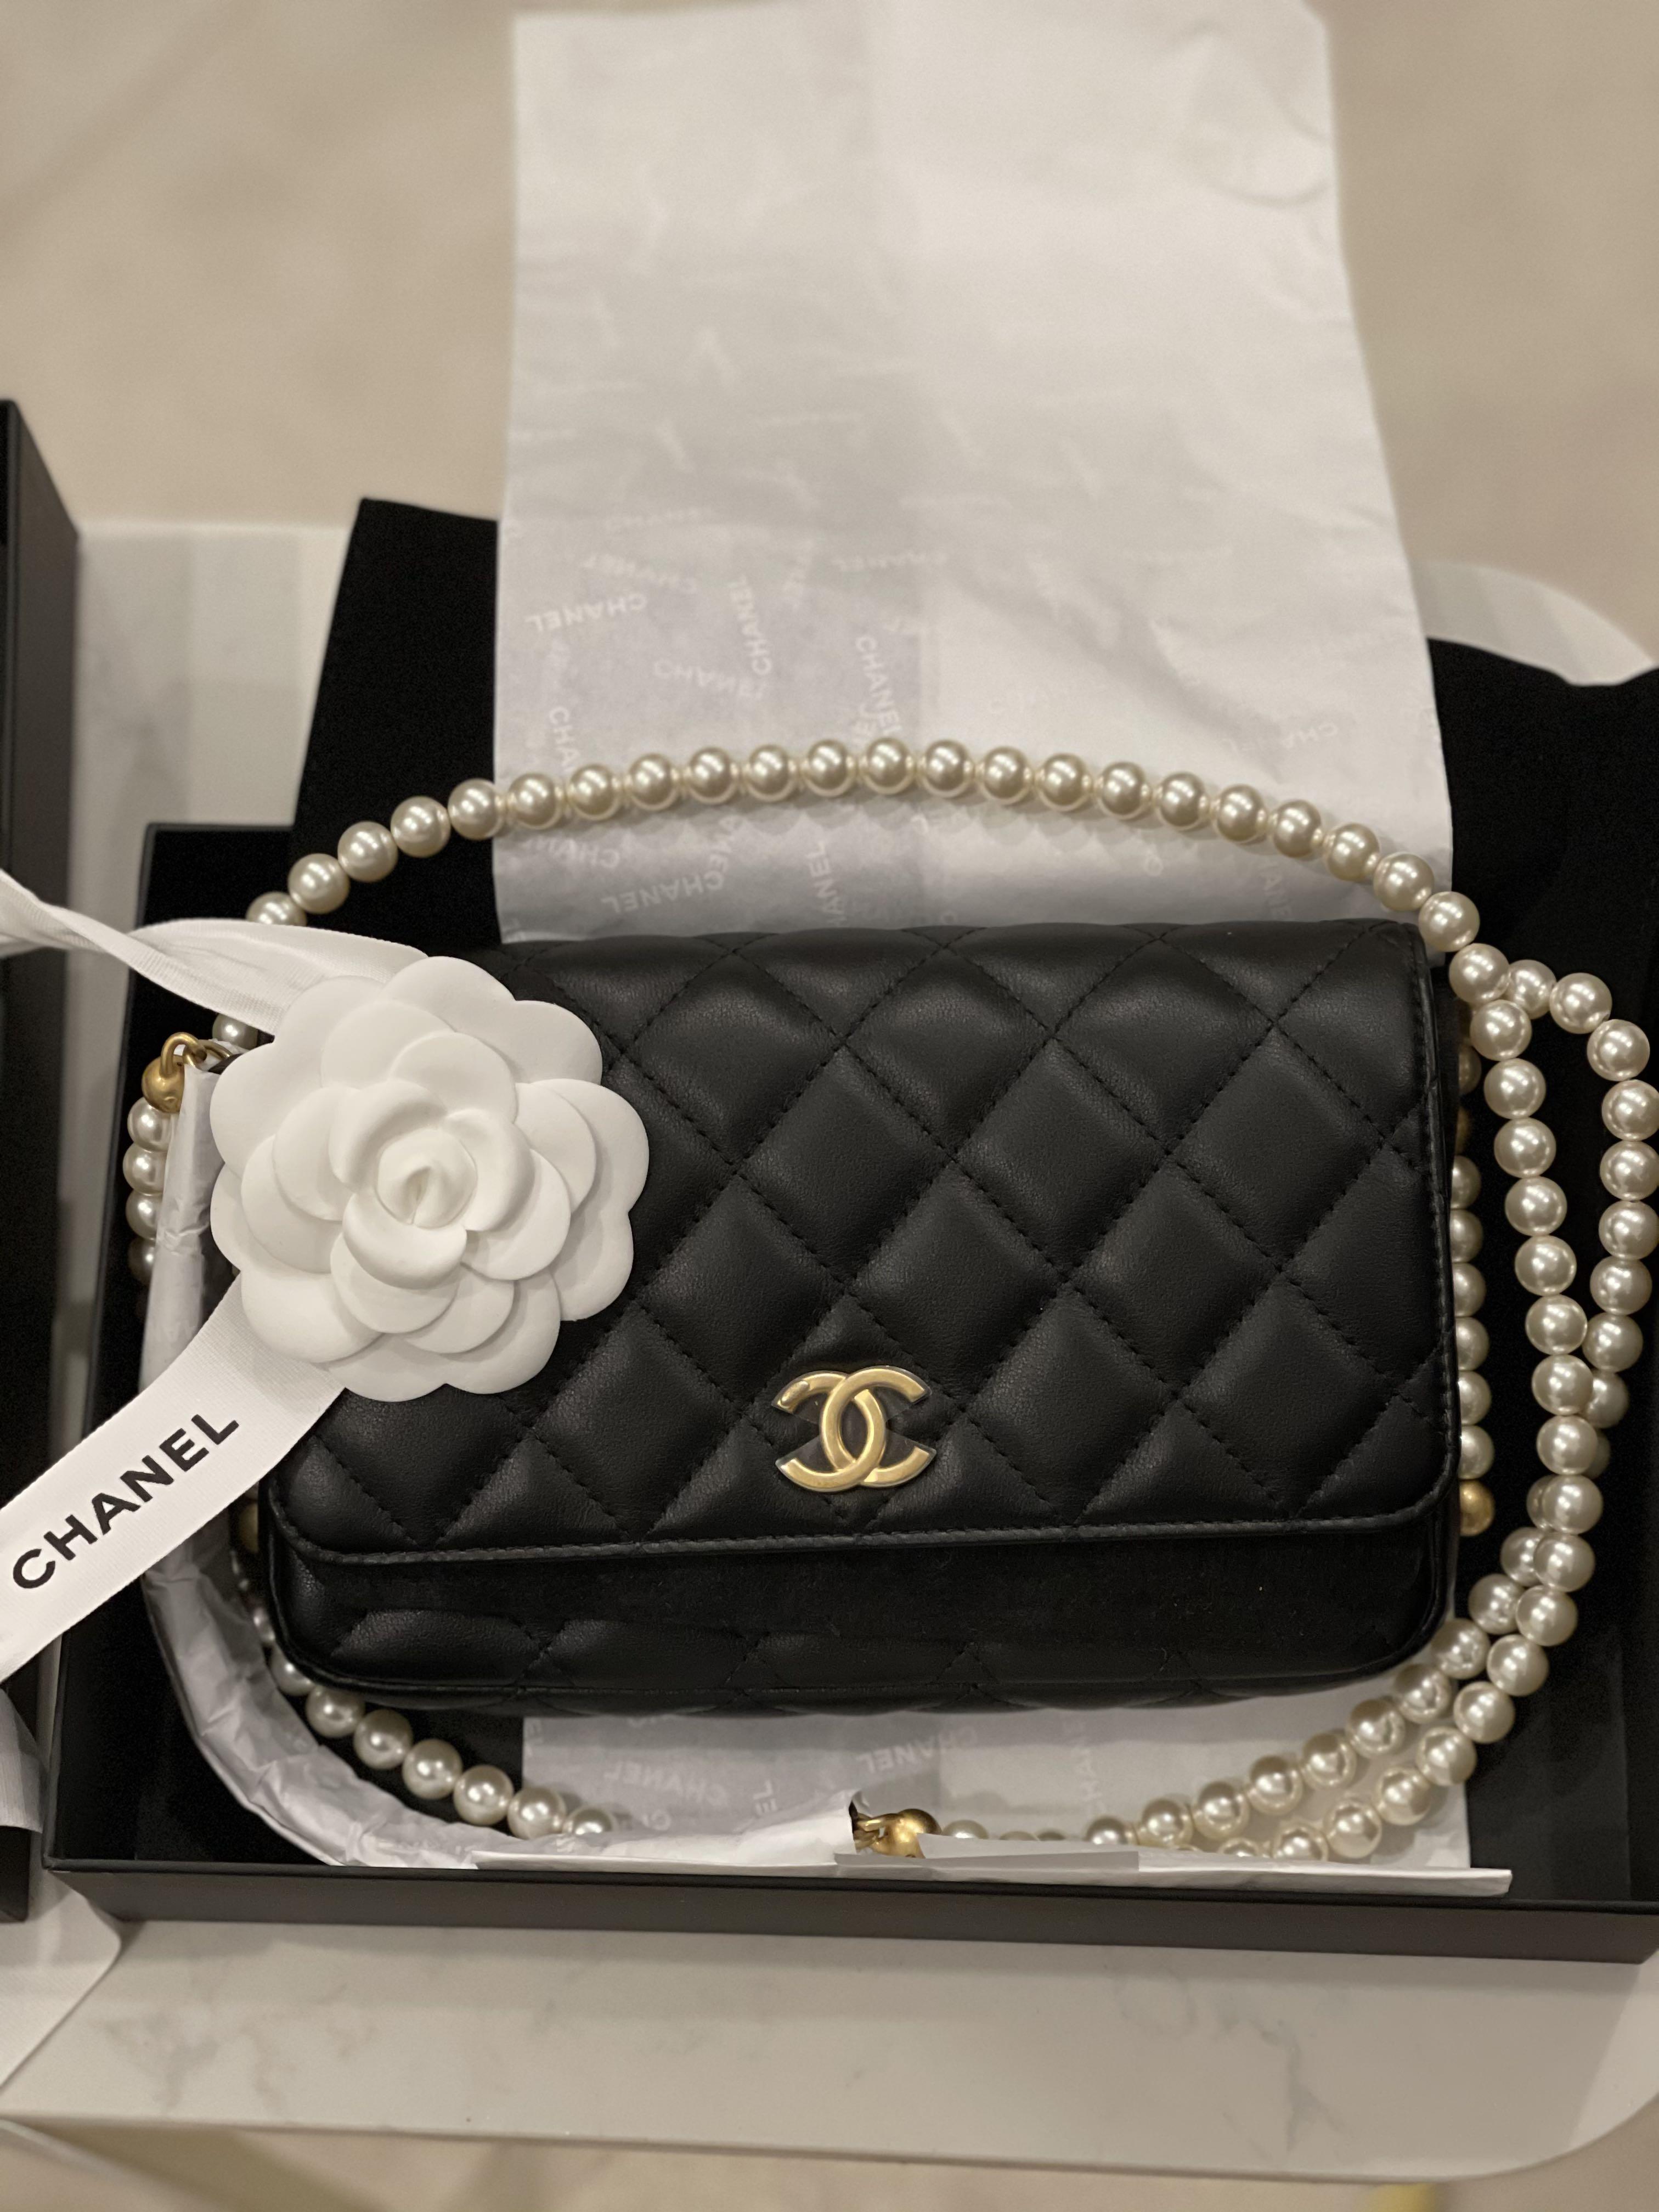 chanel purse with pearl strap